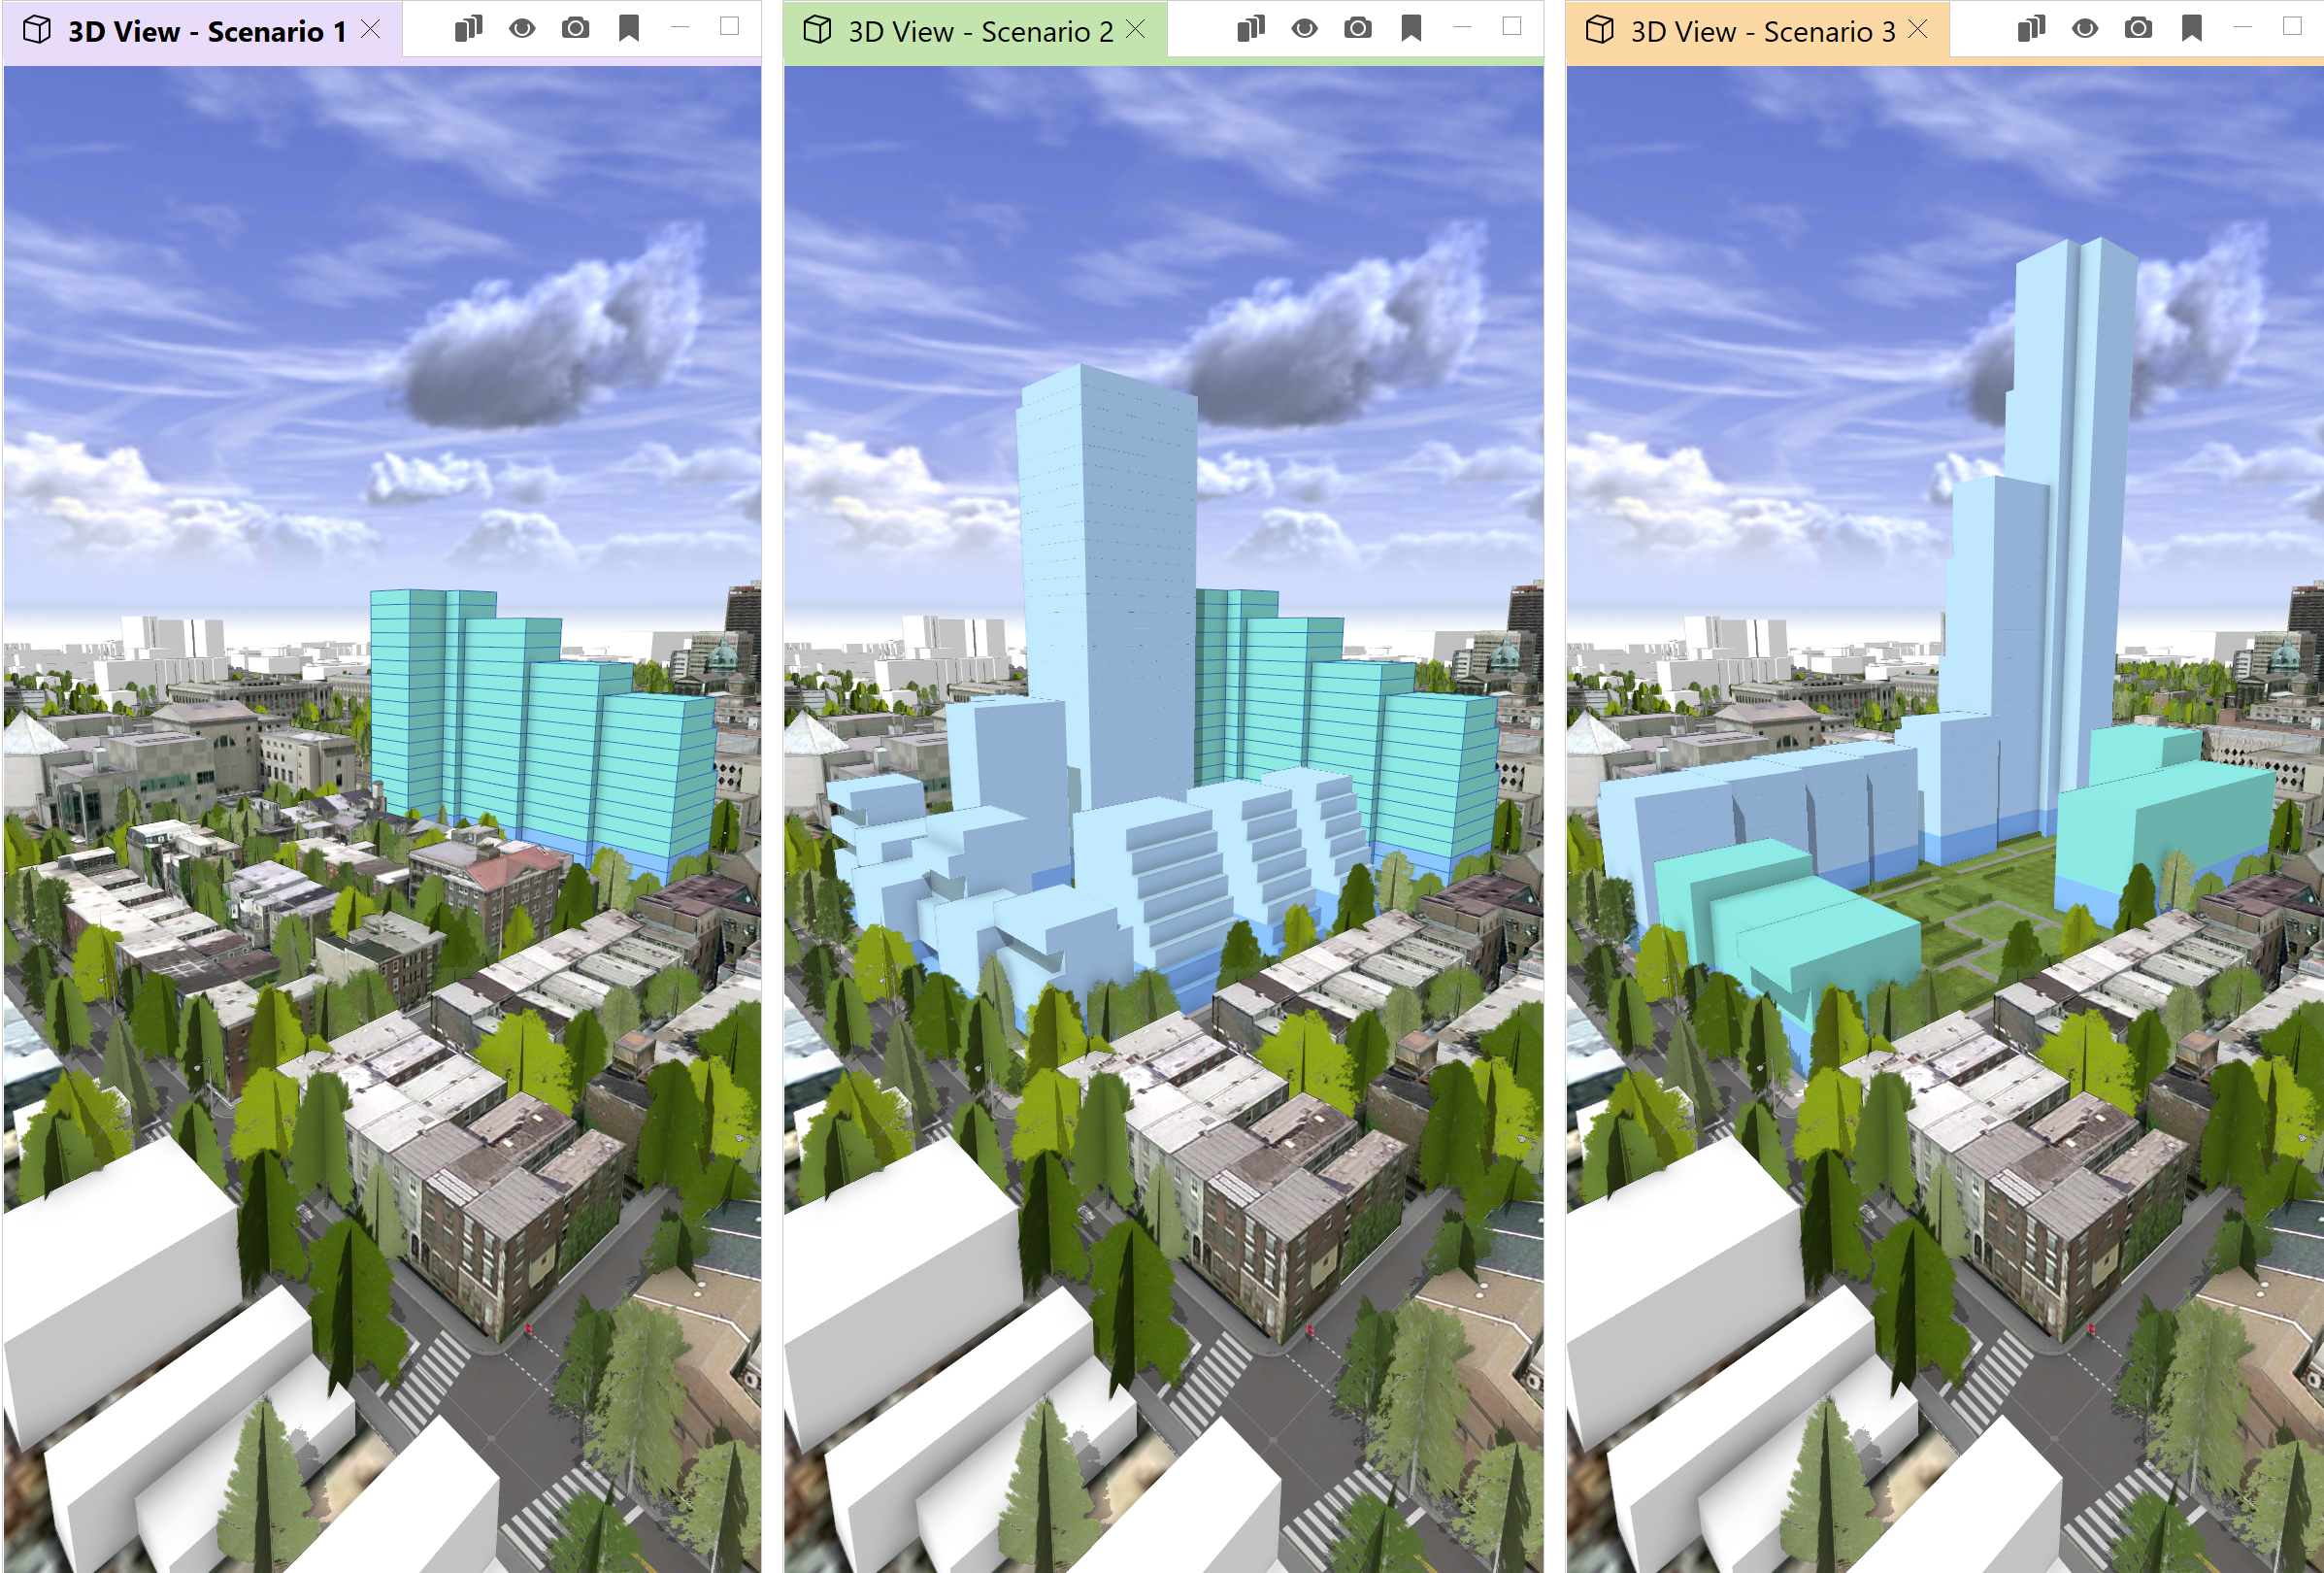 3D Viewports side by side with different scenarios